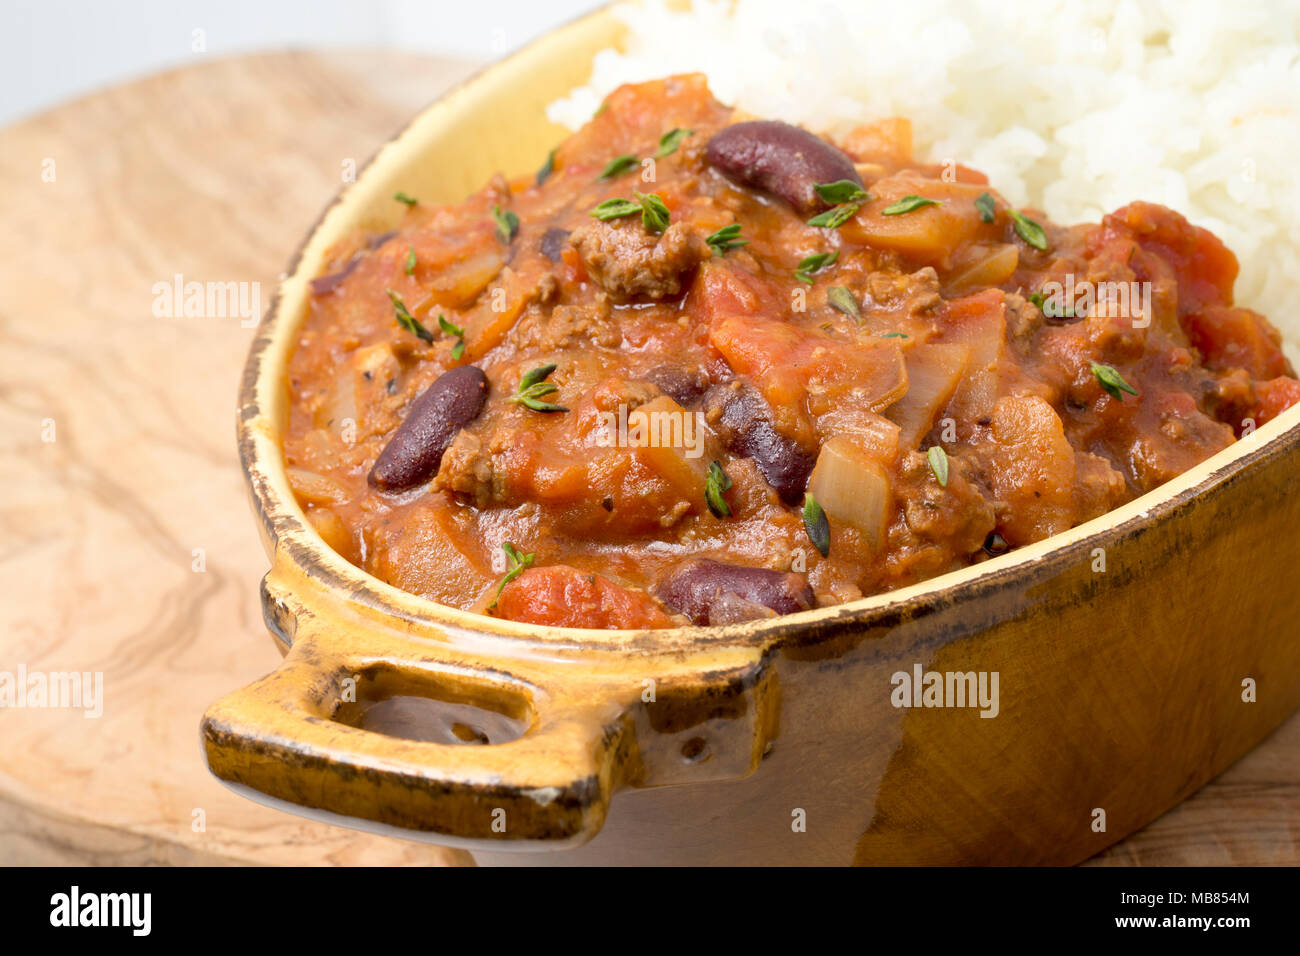 Chili con carne made from minced venison from a roe deer, Capreolus capreolus, kidney beans, tomatoes, onions, spices and sprinkled with fresh thyme.  Stock Photo